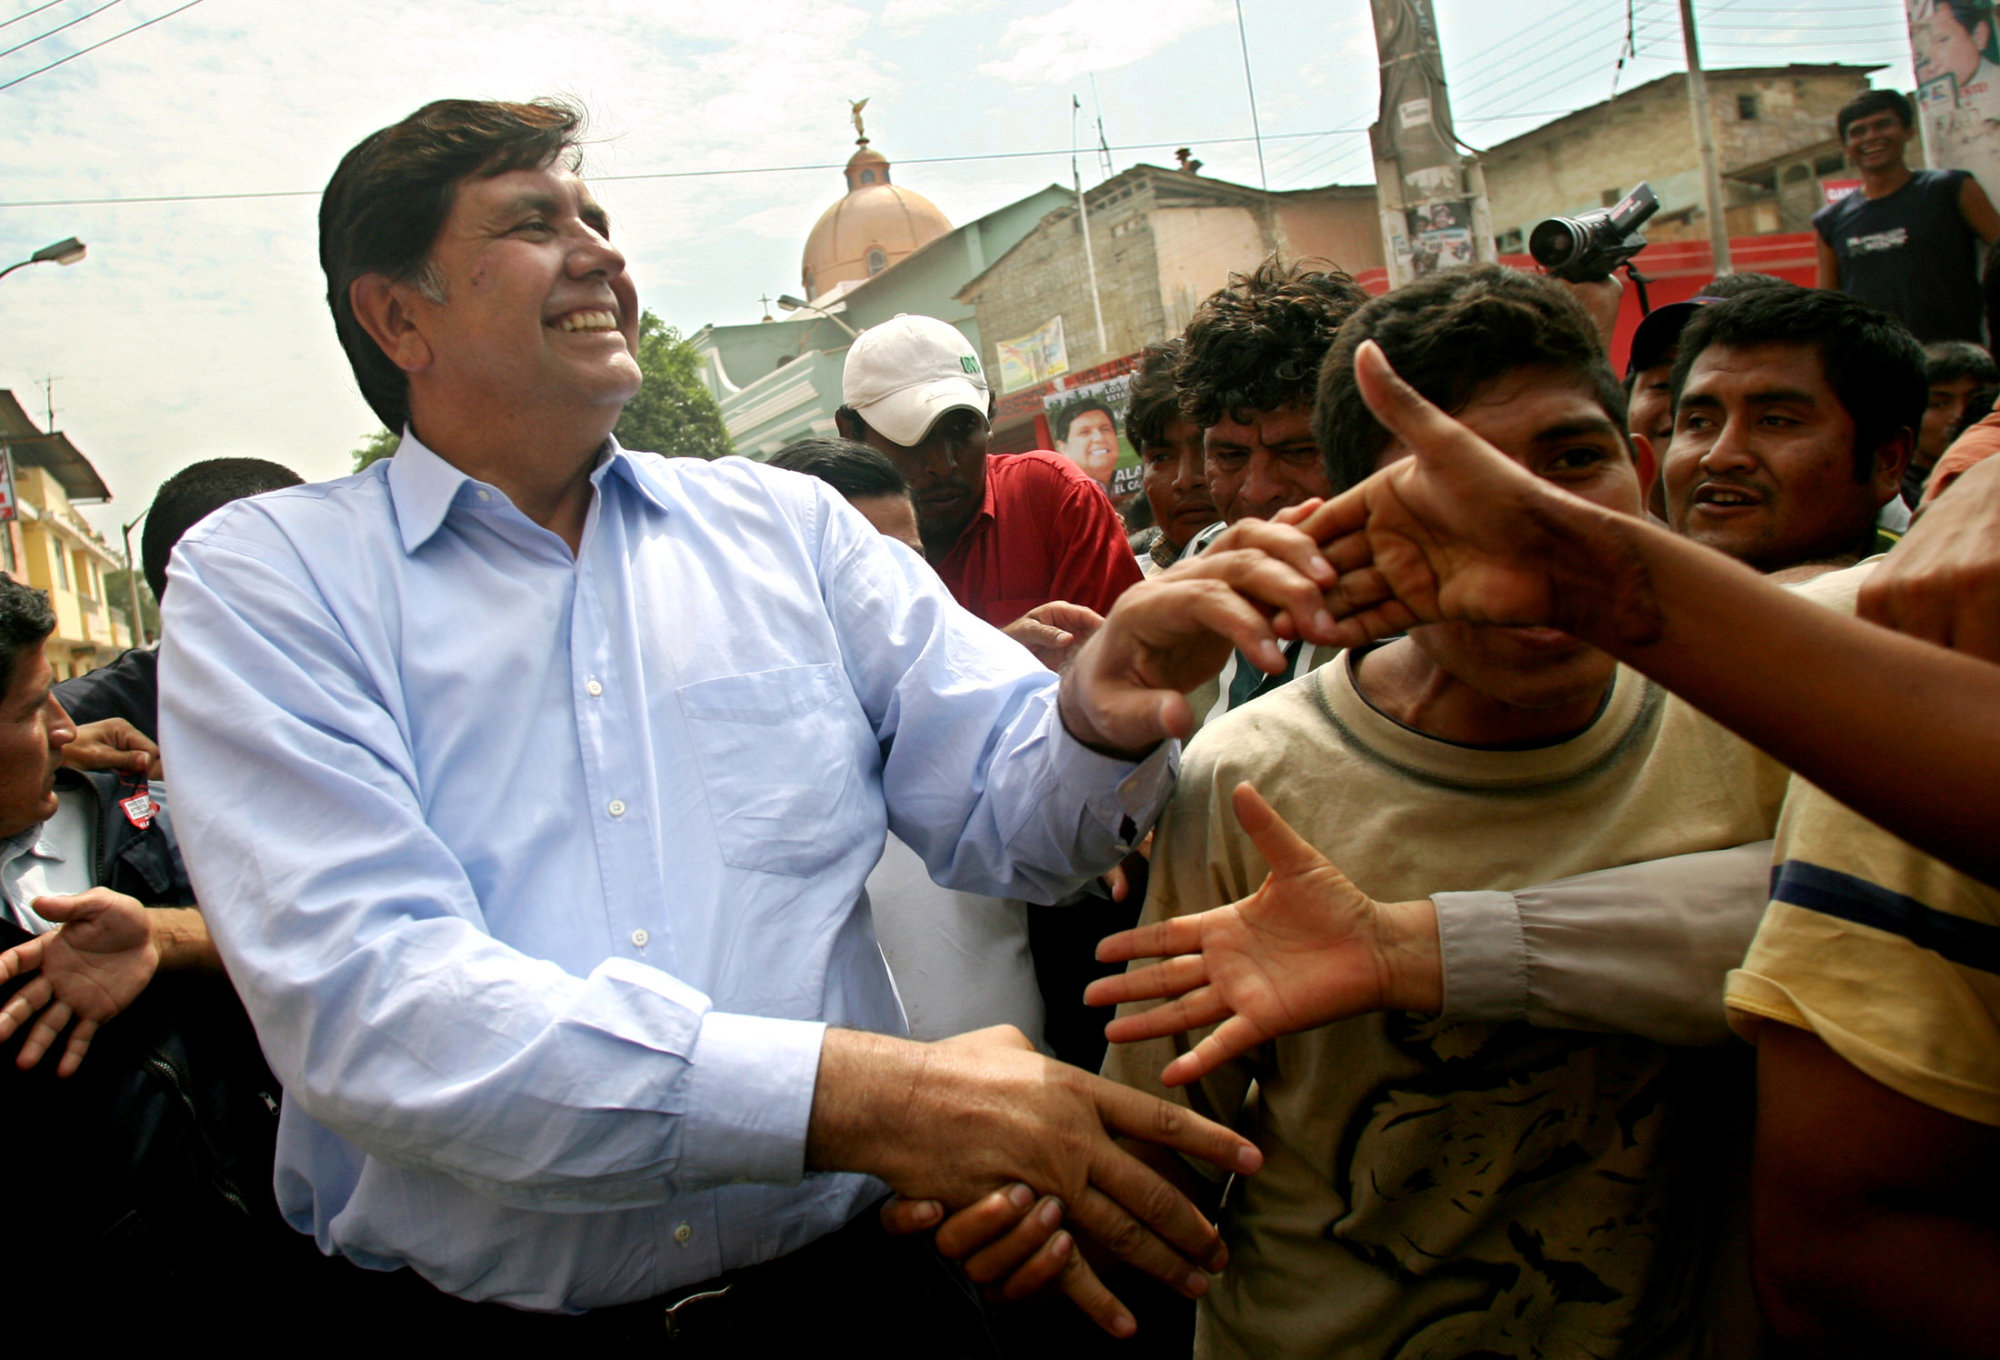 Peruvian presidential candidate Alan Garcia greets supporters during a campaign rally in Catacaos in May 2006. | REUTERS